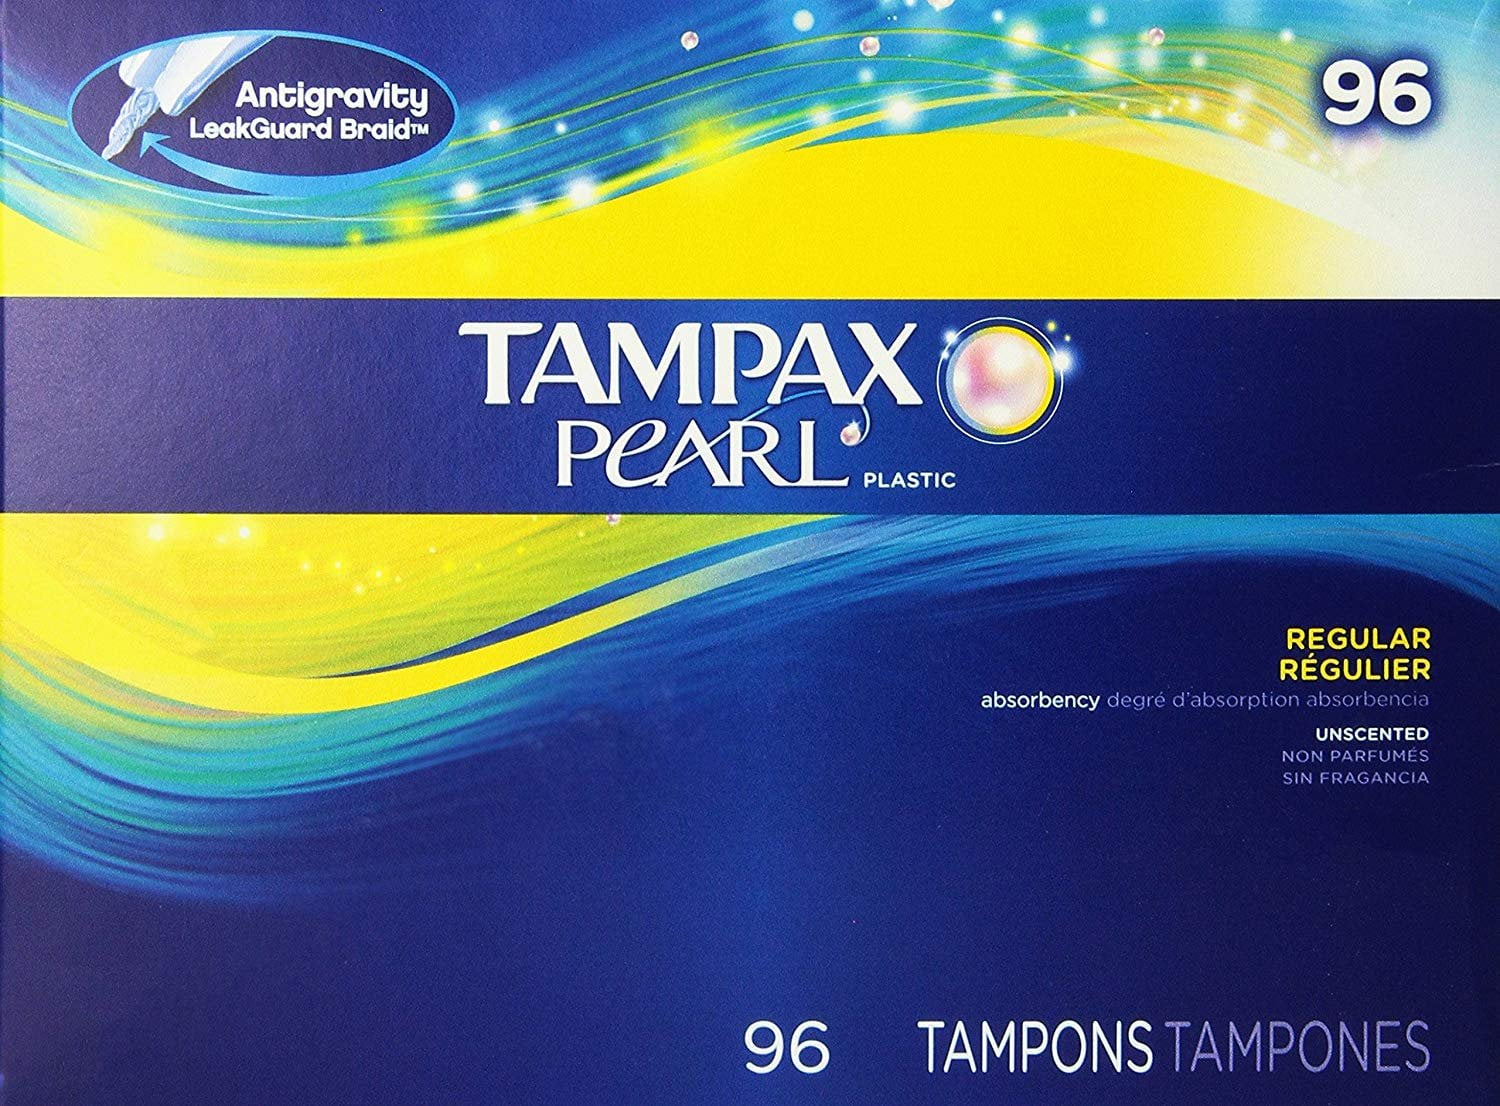  Tampax Pearl Regular Absorbency Unscented Tampons, 96 Count,  Pack of 1 : Health & Household